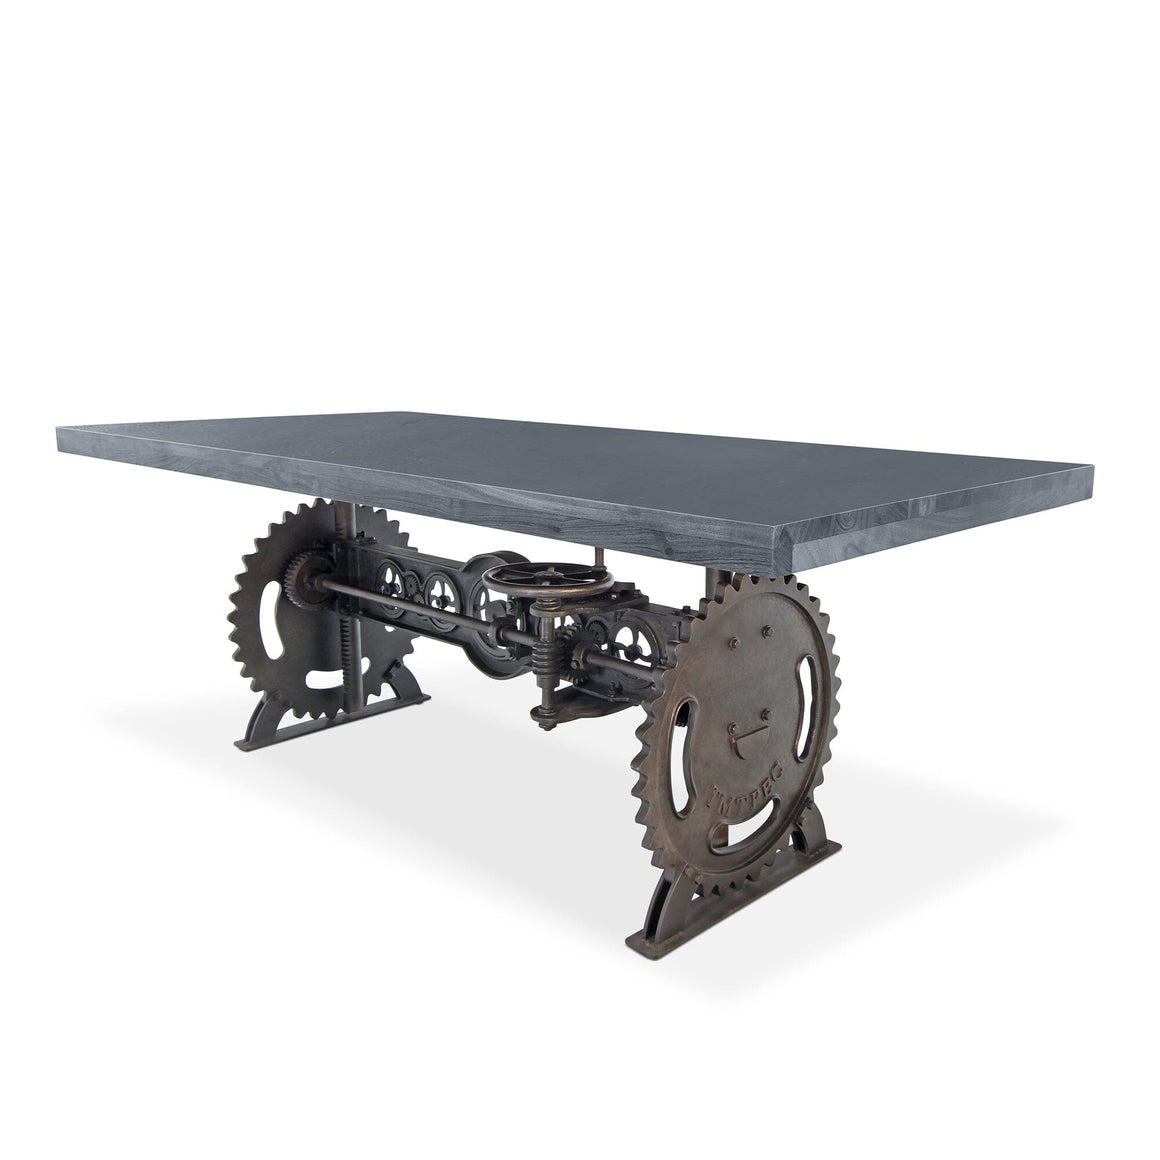 Steampunk Adjustable Dining Table - Iron Crank Base - Gray Top Dining Table Rustic Deco